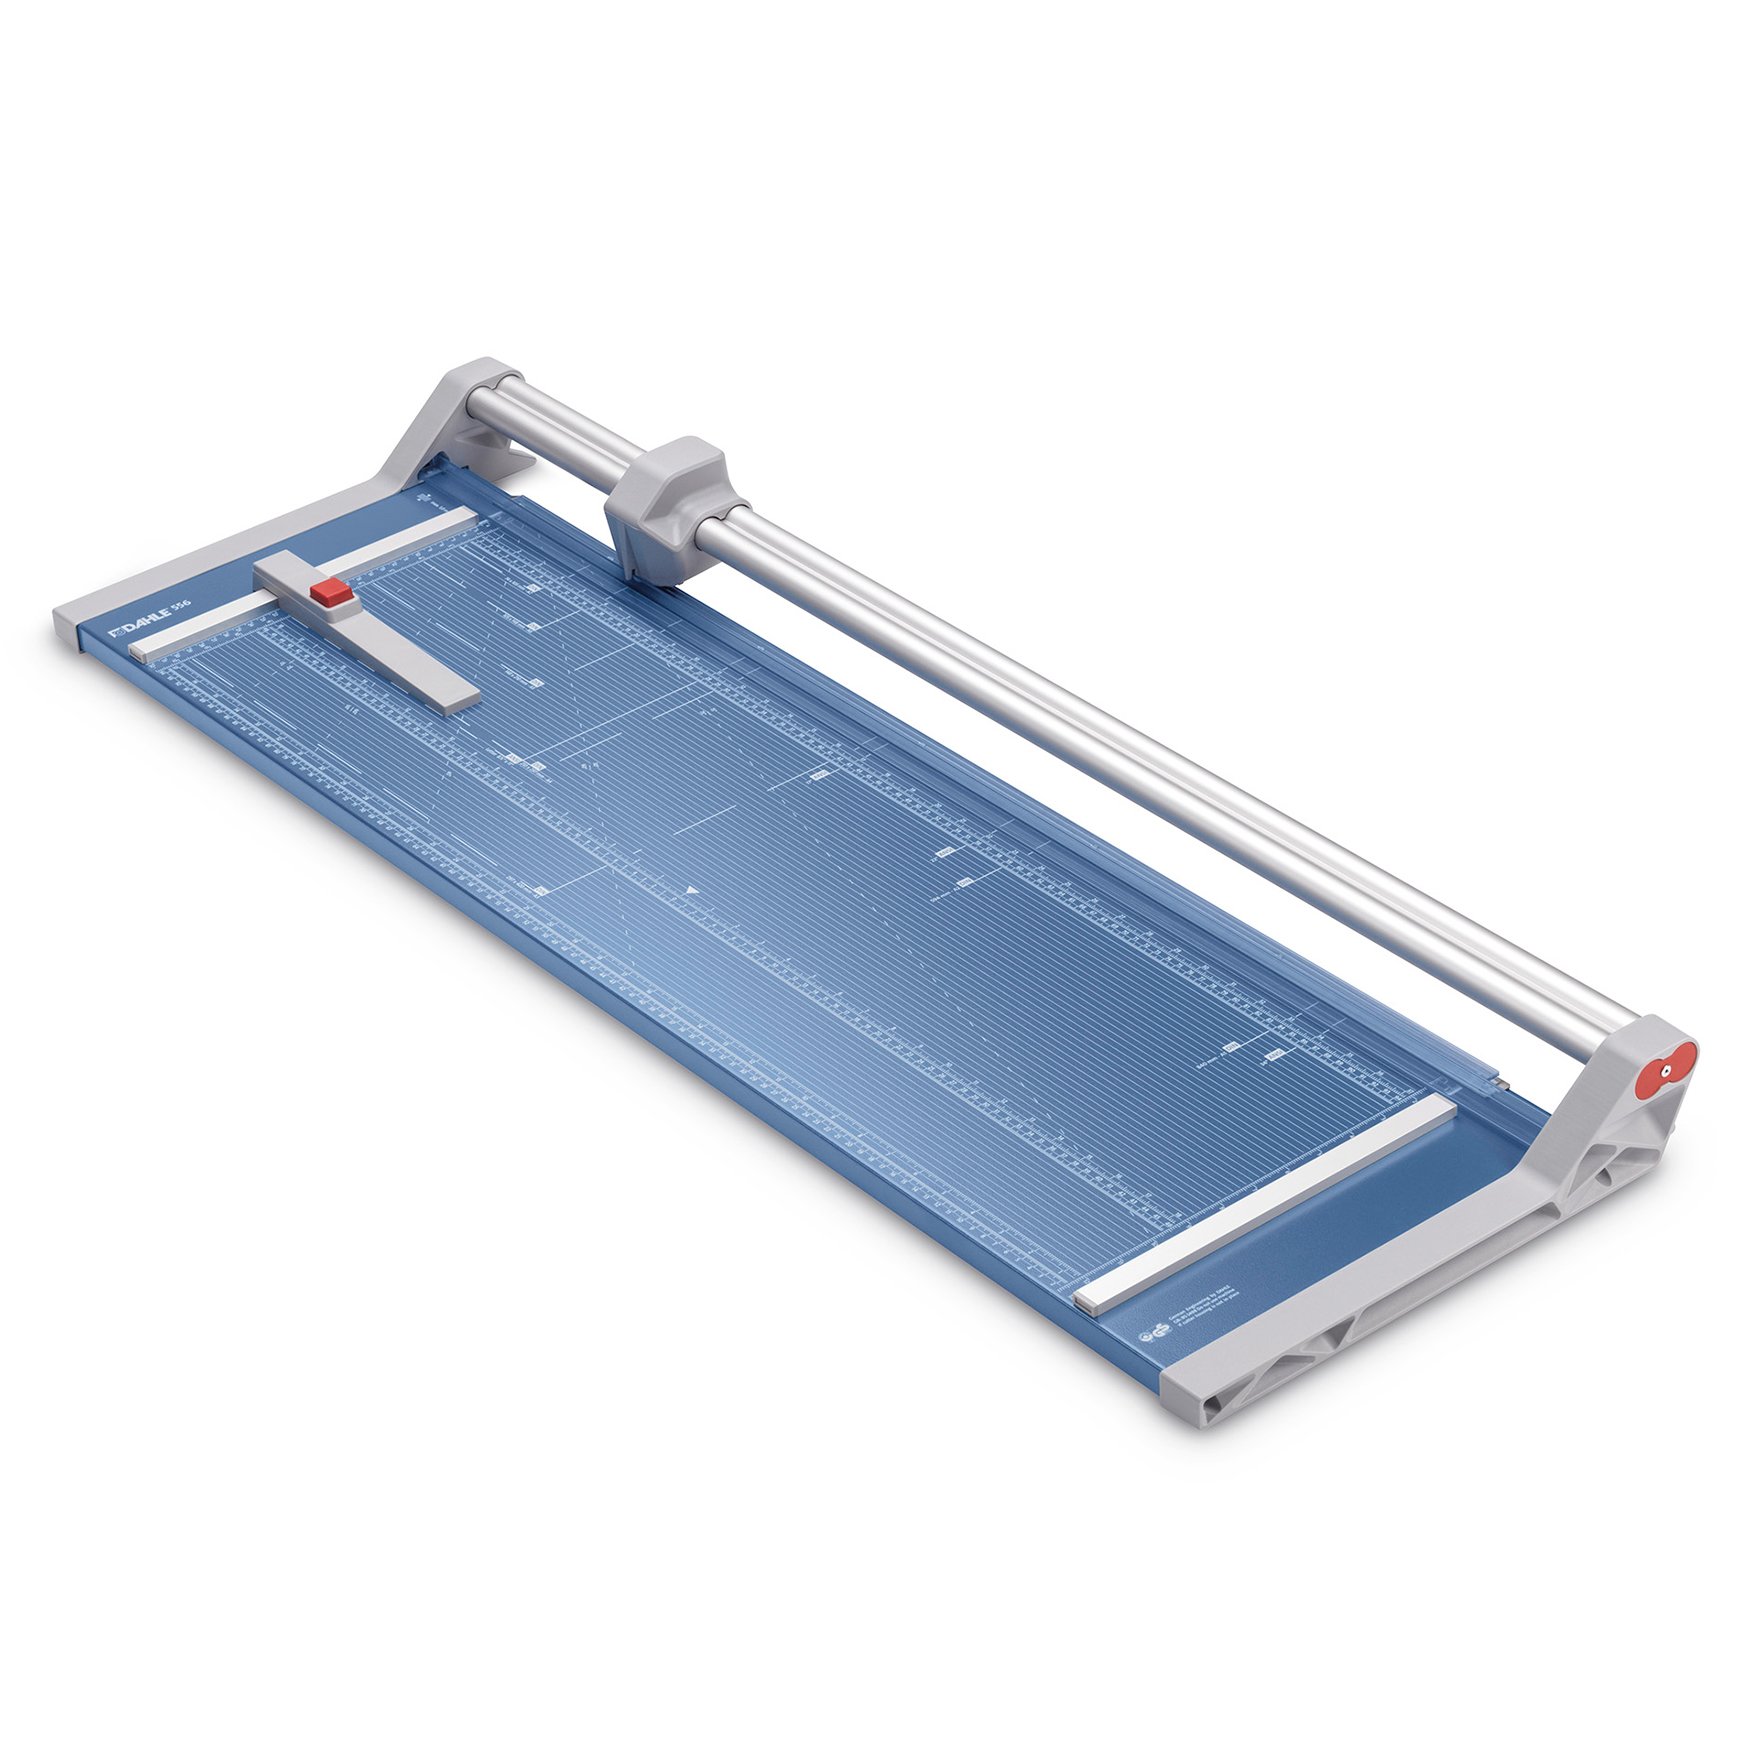 Dahle 556 A1 Rotary Trimmer (Gen3) - Click Image to Close